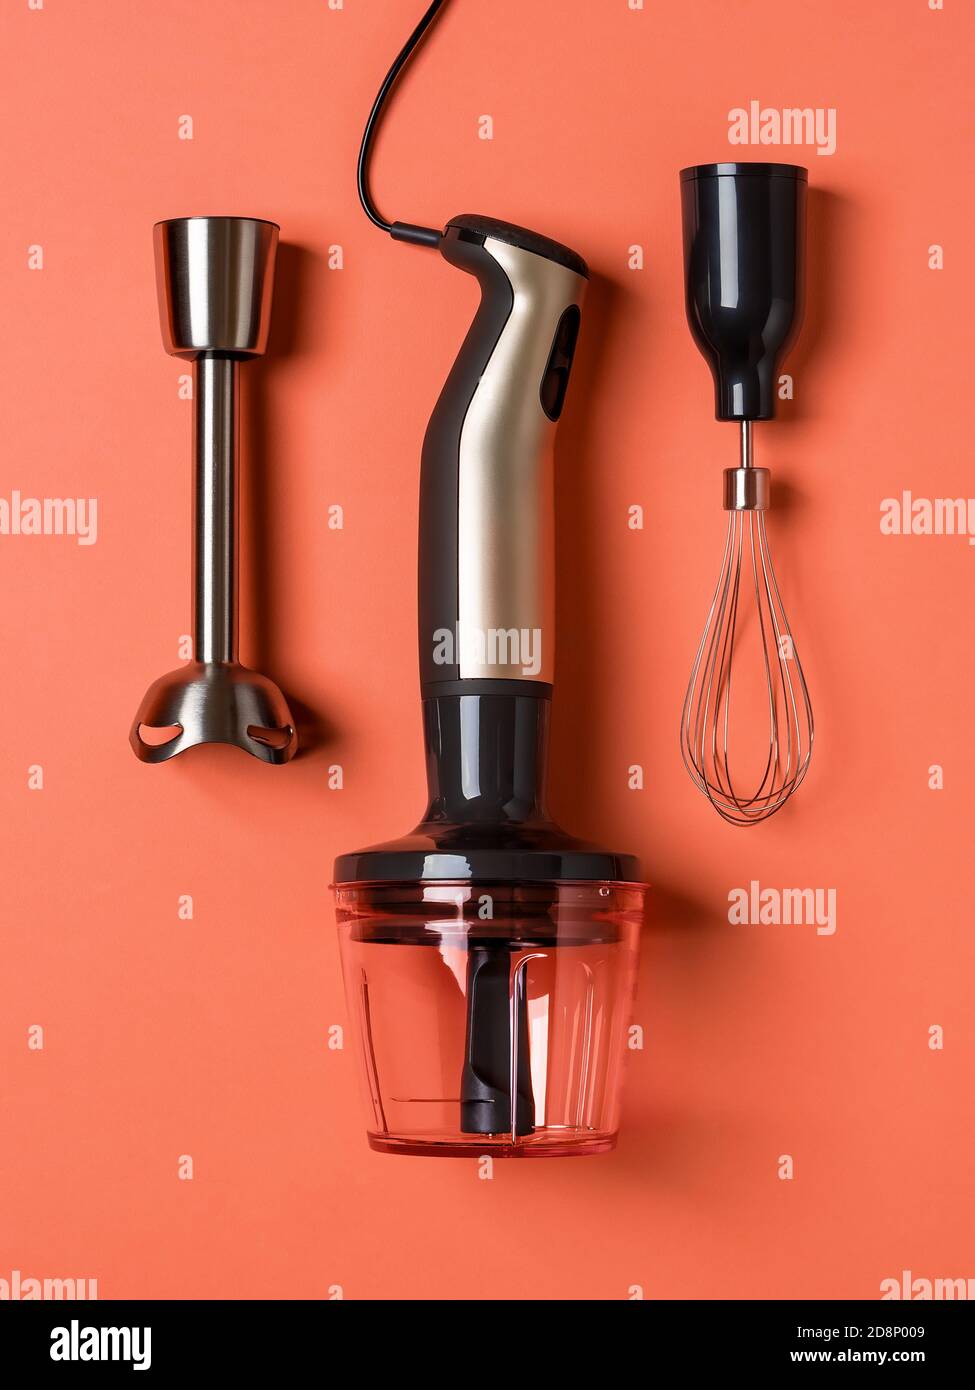 https://c8.alamy.com/comp/2D8P009/immersion-hand-blender-whisk-for-whipping-and-chopper-cup-on-a-coral-background-modern-electric-kitchen-appliances-for-making-sauces-smoothies-2D8P009.jpg